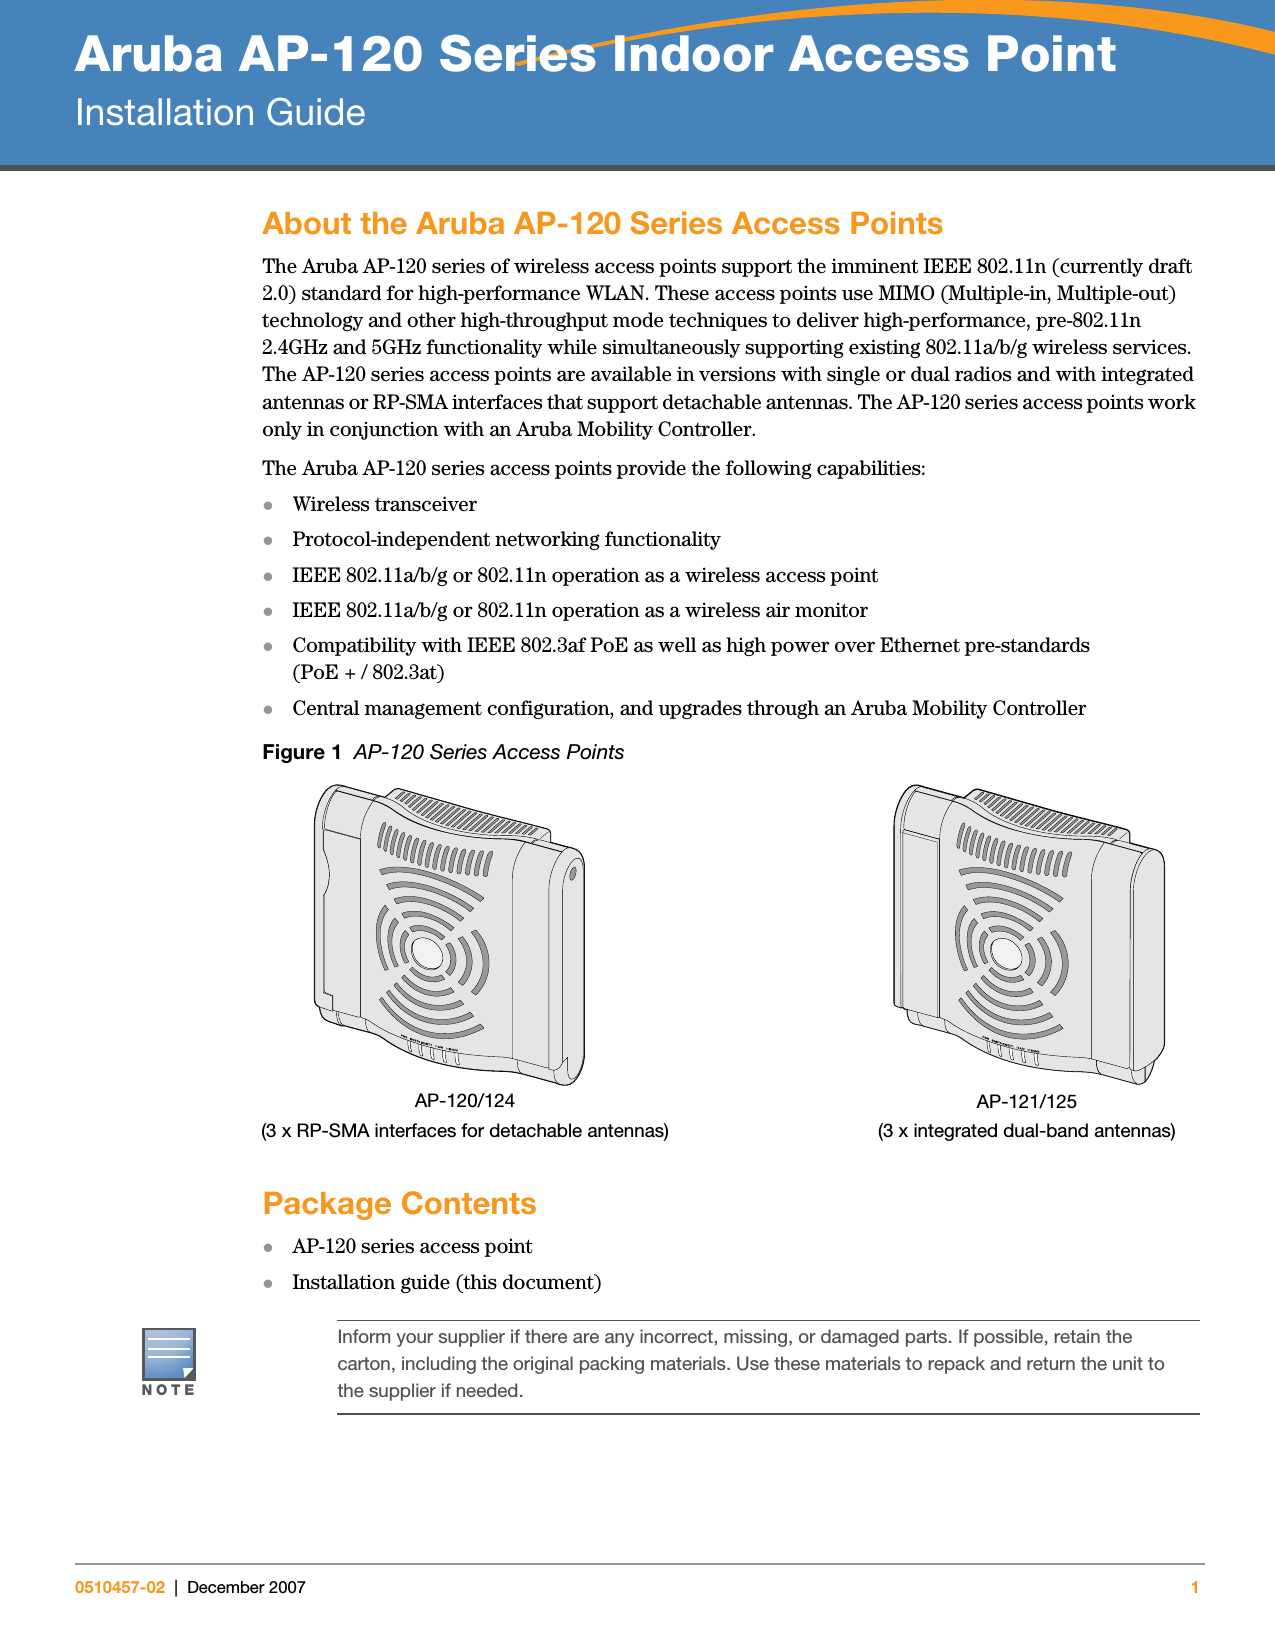 Aruba AP-120 Series Indoor Access PointInstallation Guide0510457-02 | December 2007 1About the Aruba AP-120 Series Access PointsThe Aruba AP-120 series of wireless access points support the imminent IEEE 802.11n (currently draft 2.0) standard for high-performance WLAN. These access points use MIMO (Multiple-in, Multiple-out) technology and other high-throughput mode techniques to deliver high-performance, pre-802.11n 2.4GHz and 5GHz functionality while simultaneously supporting existing 802.11a/b/g wireless services. The AP-120 series access points are available in versions with single or dual radios and with integrated antennas or RP-SMA interfaces that support detachable antennas. The AP-120 series access points work only in conjunction with an Aruba Mobility Controller.The Aruba AP-120 series access points provide the following capabilities:zWireless transceiverzProtocol-independent networking functionalityzIEEE 802.11a/b/g or 802.11n operation as a wireless access pointzIEEE 802.11a/b/g or 802.11n operation as a wireless air monitorzCompatibility with IEEE 802.3af PoE as well as high power over Ethernet pre-standards (PoE + / 802.3at)zCentral management configuration, and upgrades through an Aruba Mobility ControllerFigure 1  AP-120 Series Access PointsPackage ContentszAP-120 series access pointzInstallation guide (this document)ap12_001AP-120/124(3 x RP-SMA interfaces for detachable antennas)AP-121/125(3 x integrated dual-band antennas)NOTEInform your supplier if there are any incorrect, missing, or damaged parts. If possible, retain the carton, including the original packing materials. Use these materials to repack and return the unit to the supplier if needed.